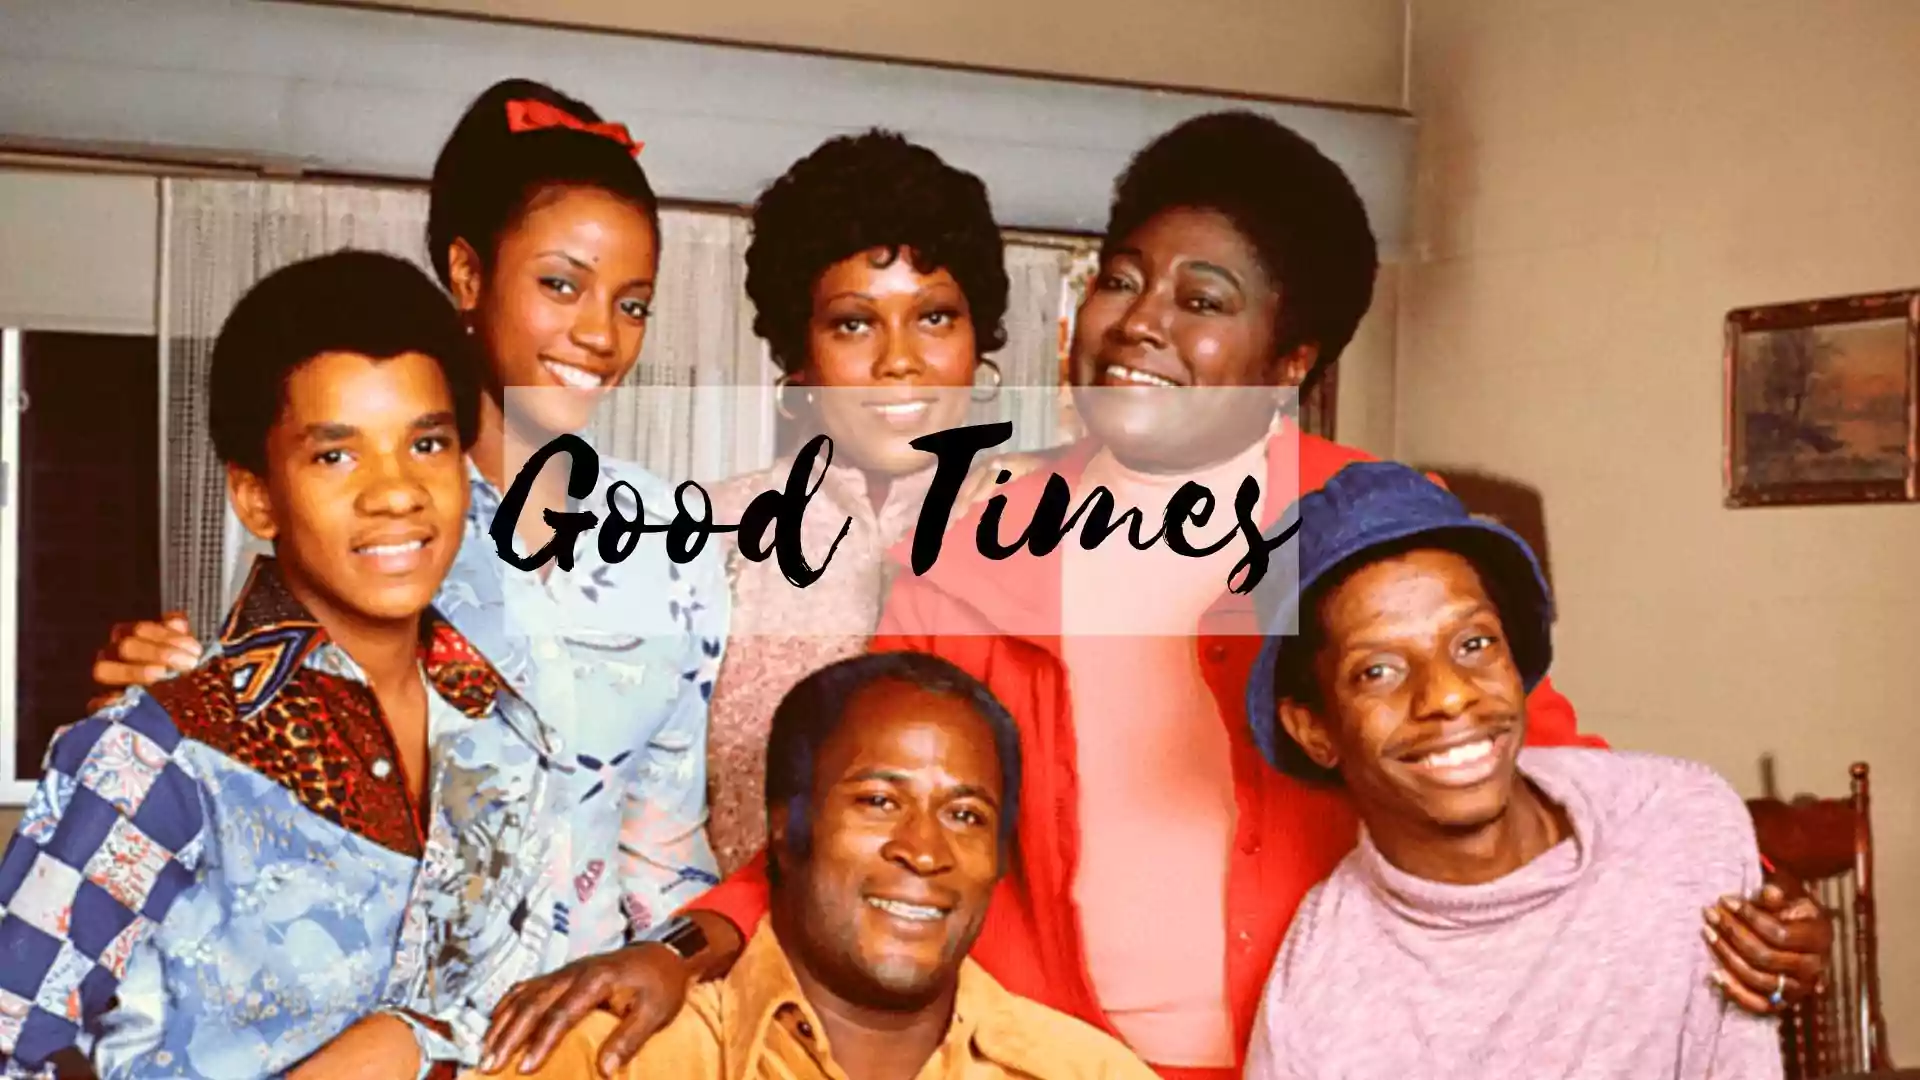 Good Times Wallpaper and Image